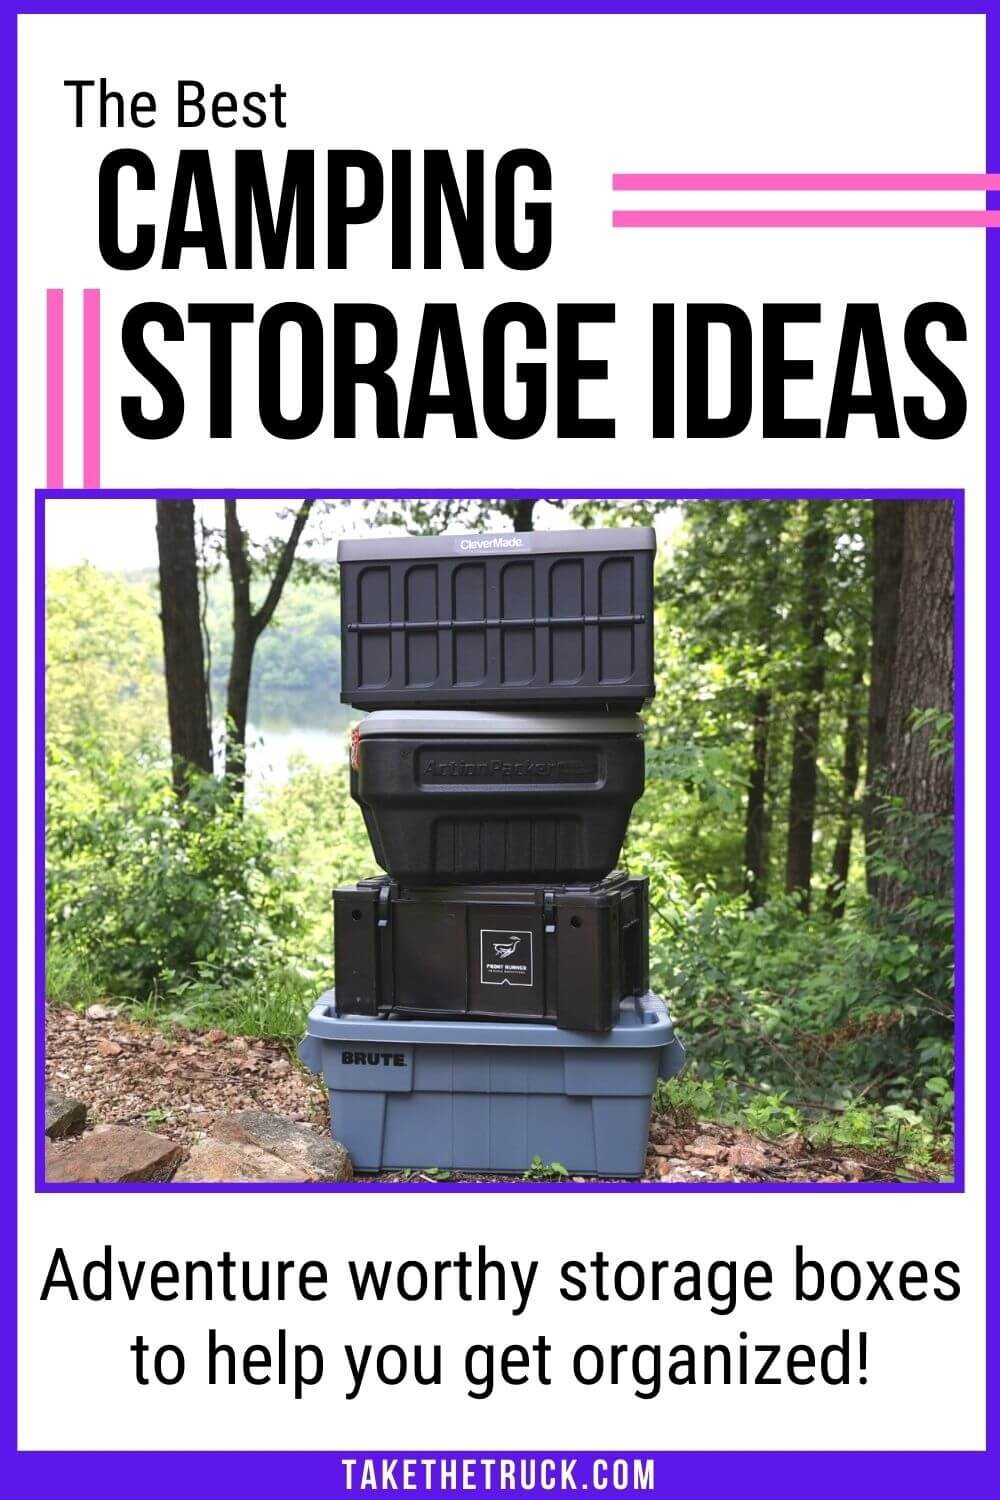 The best storage bins for camping, camping storage box ideas, and storage containers for camping. Many storage boxes for camping - truck camper storage, car camping storage, overland storage.